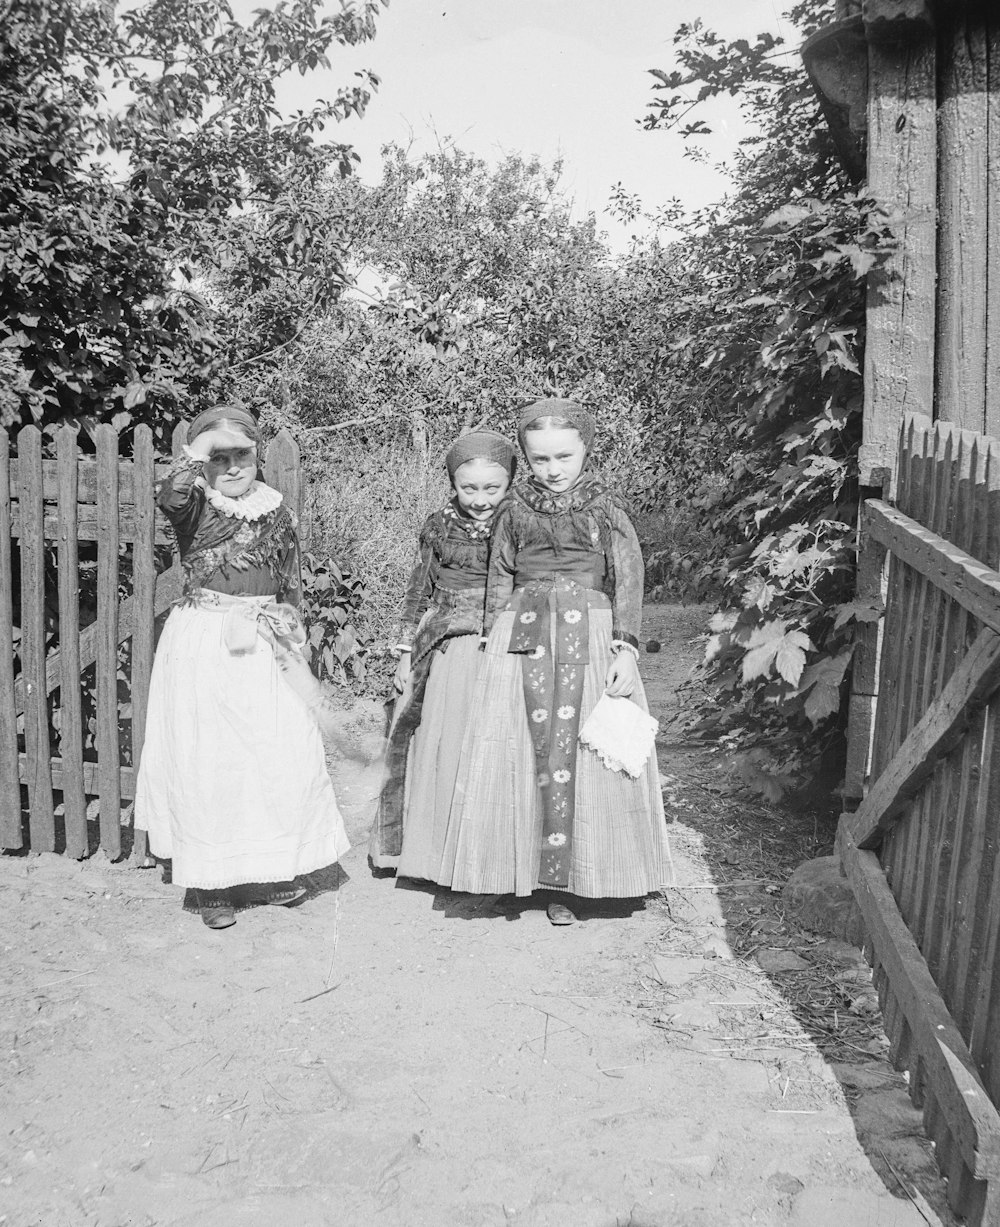 a black and white photo of three women standing in front of a fence